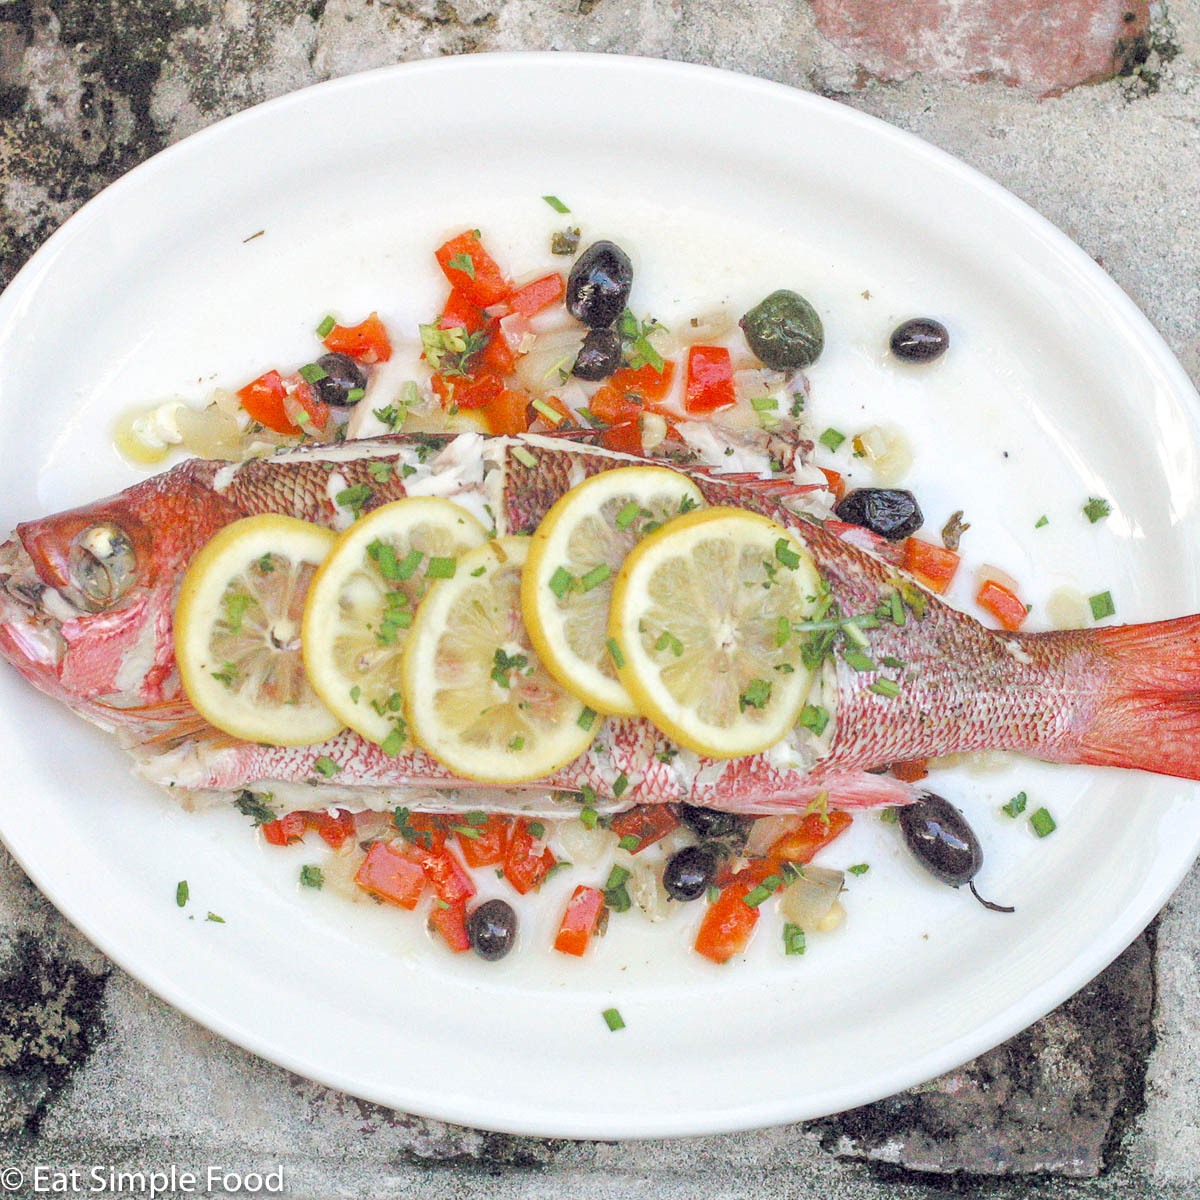 Baked Whole Red Snapper En Papillote Recipe Eat Simple Food,Crested Gecko Terrarium